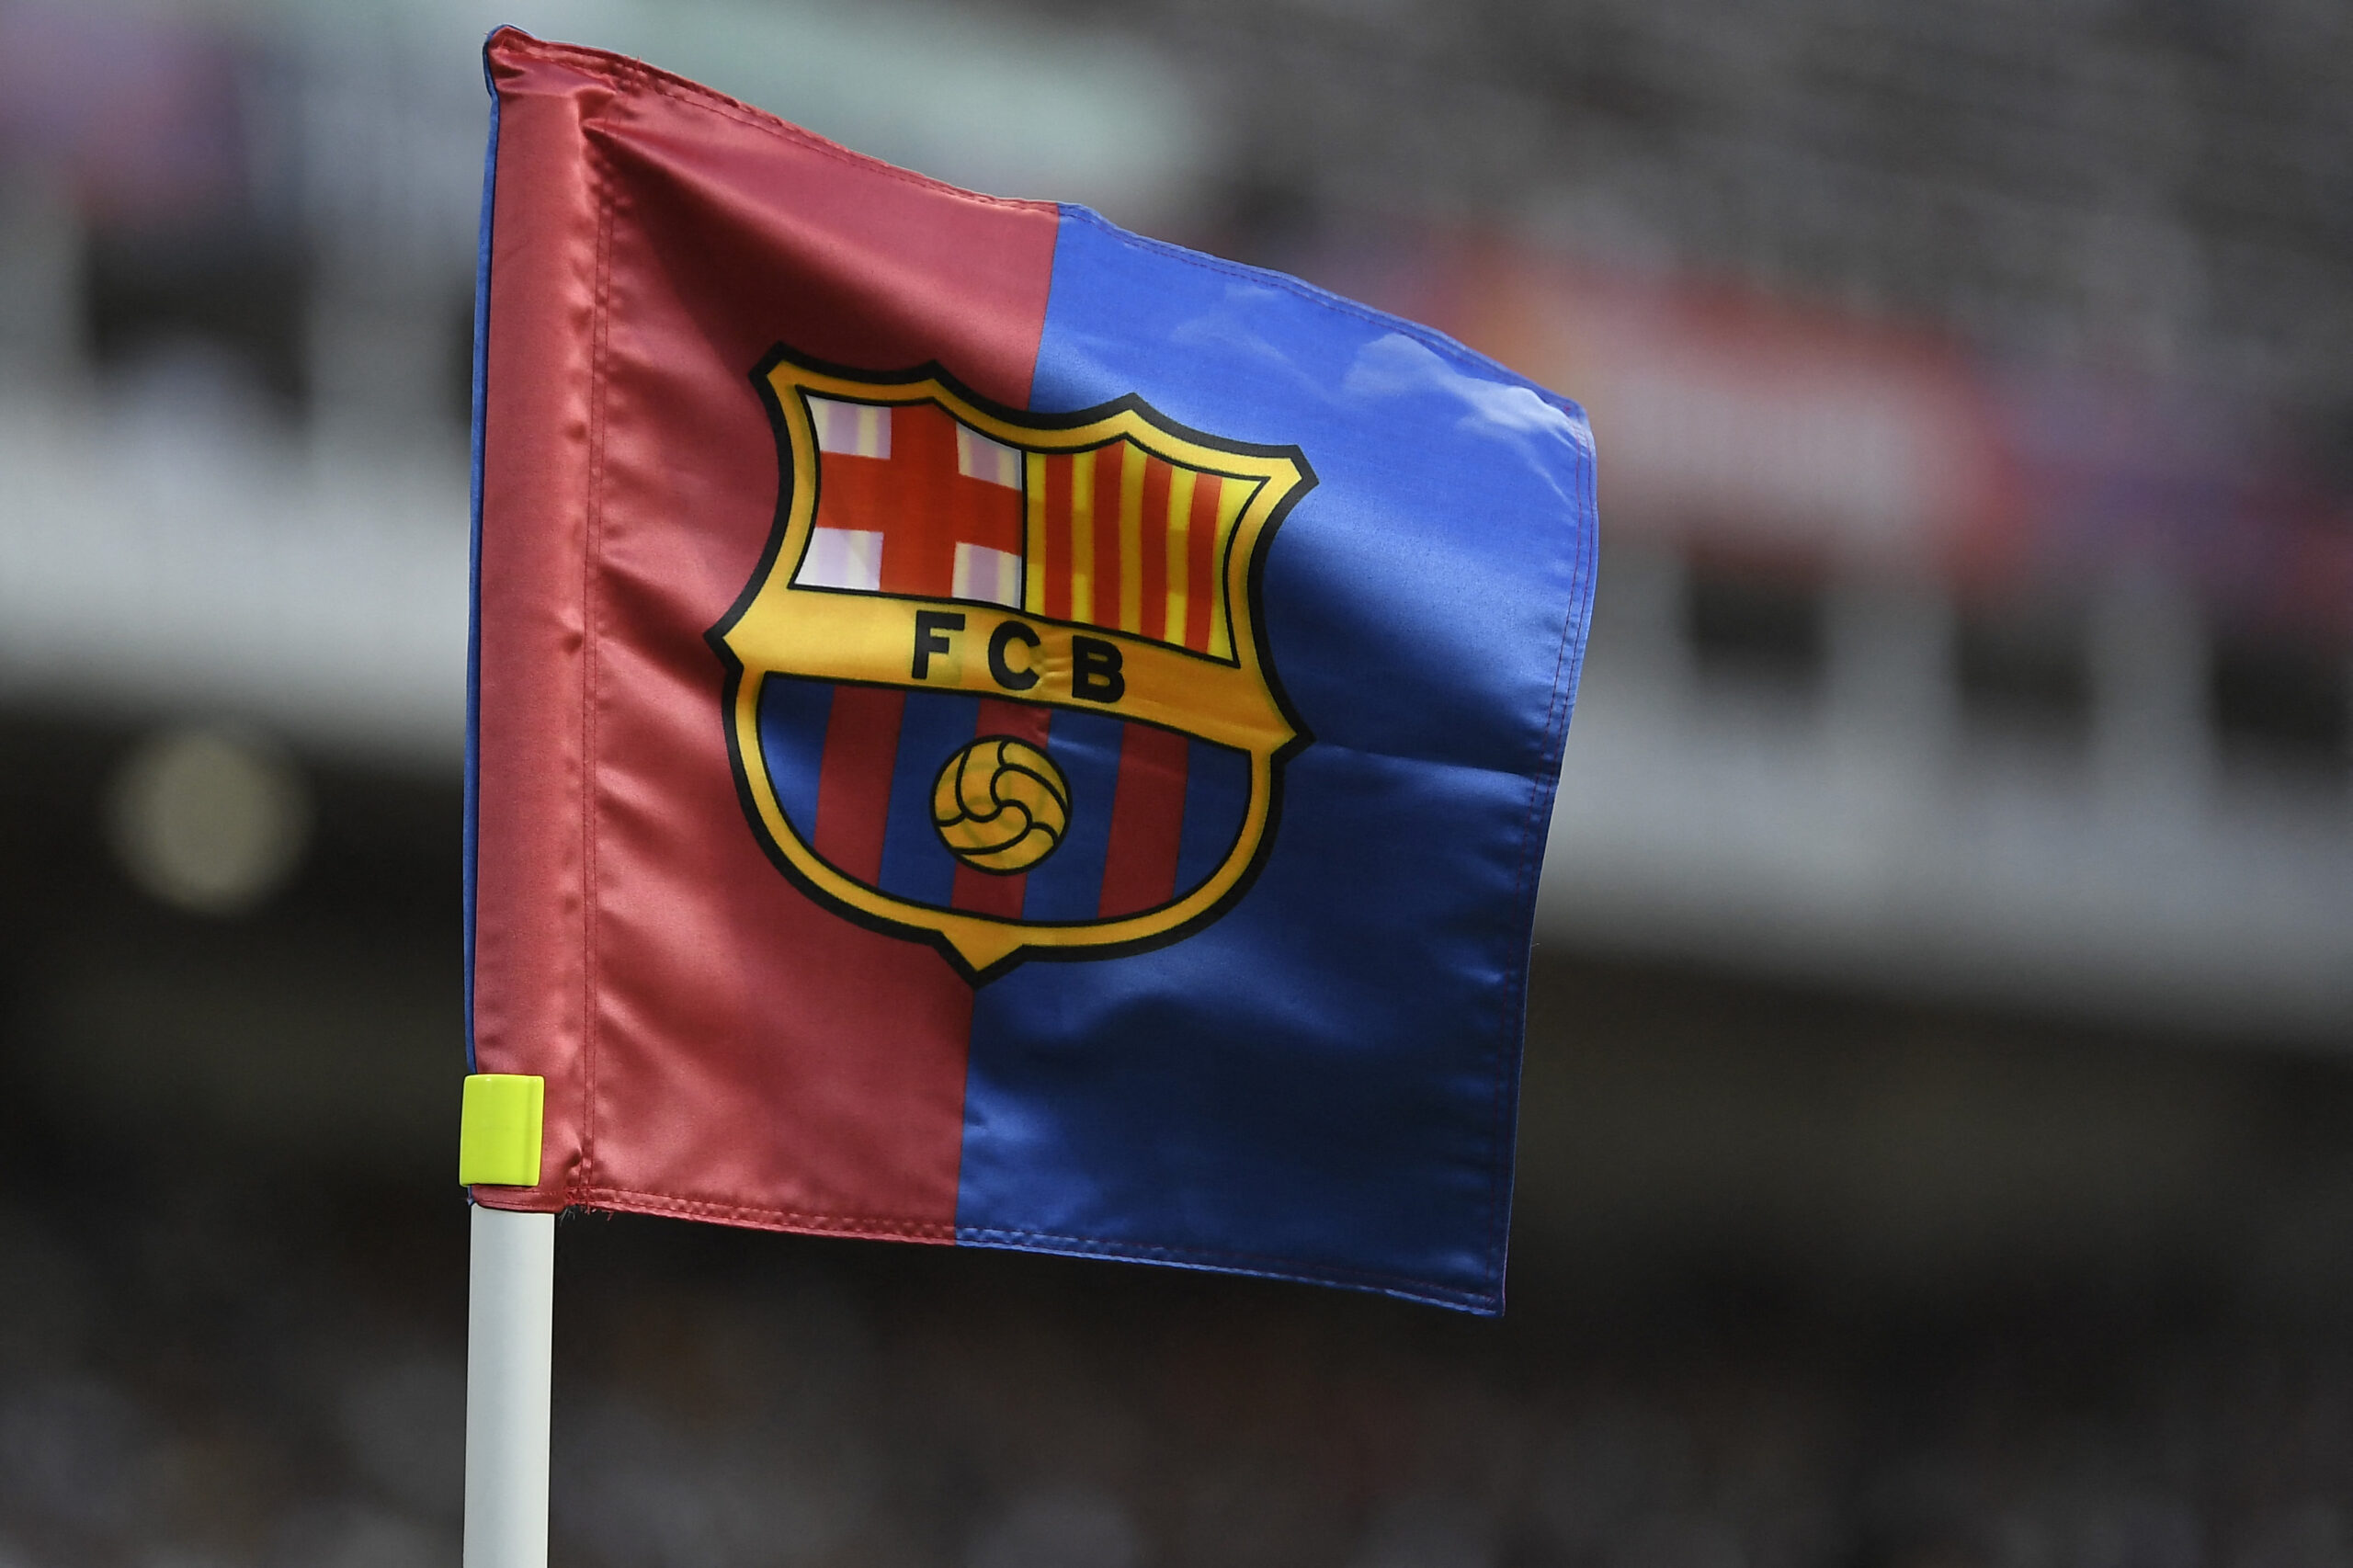 A corner flag with the badge of FC Barcelona flies during the 58th Joan Gamper Trophy football match between FC Barcelona and Tottenham Hotspur FC at the Estadi Olimpic Lluis Companys in Barcelona on August 8, 2023.